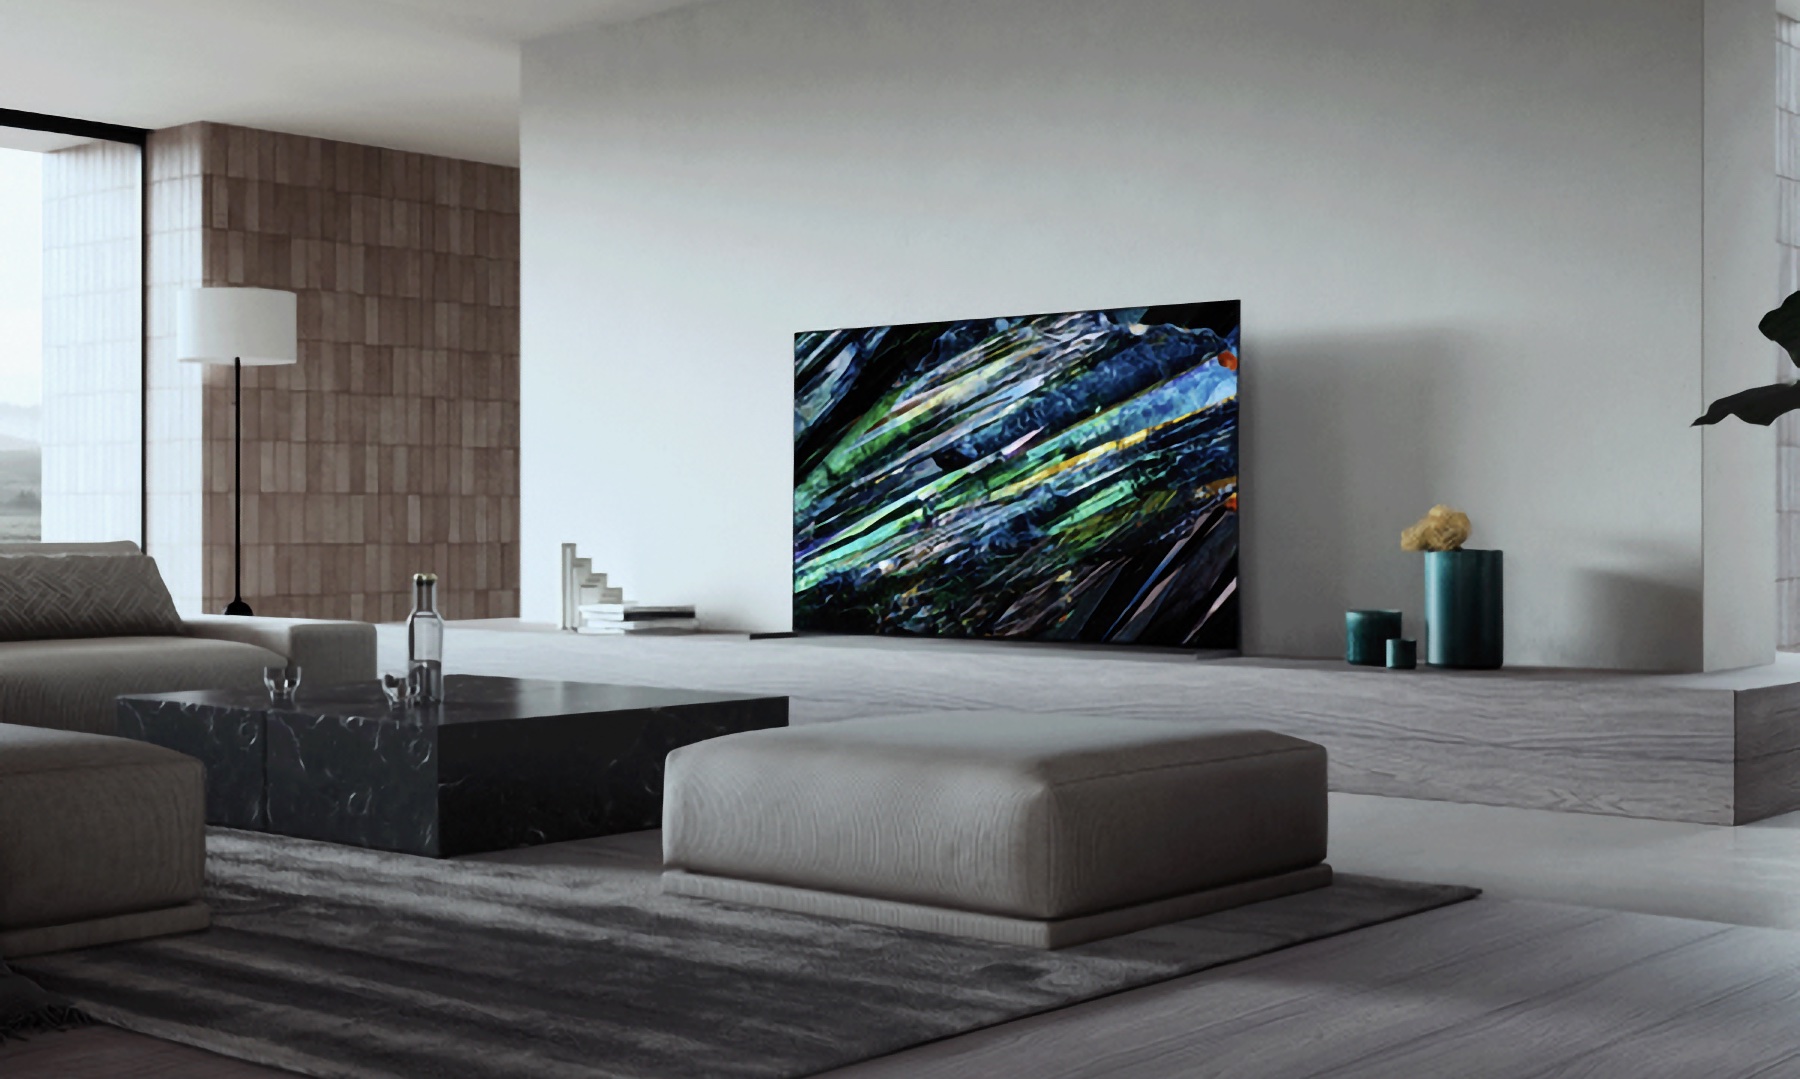 Sony's latest QD-OLED TV is significantly brighter than last year’s models